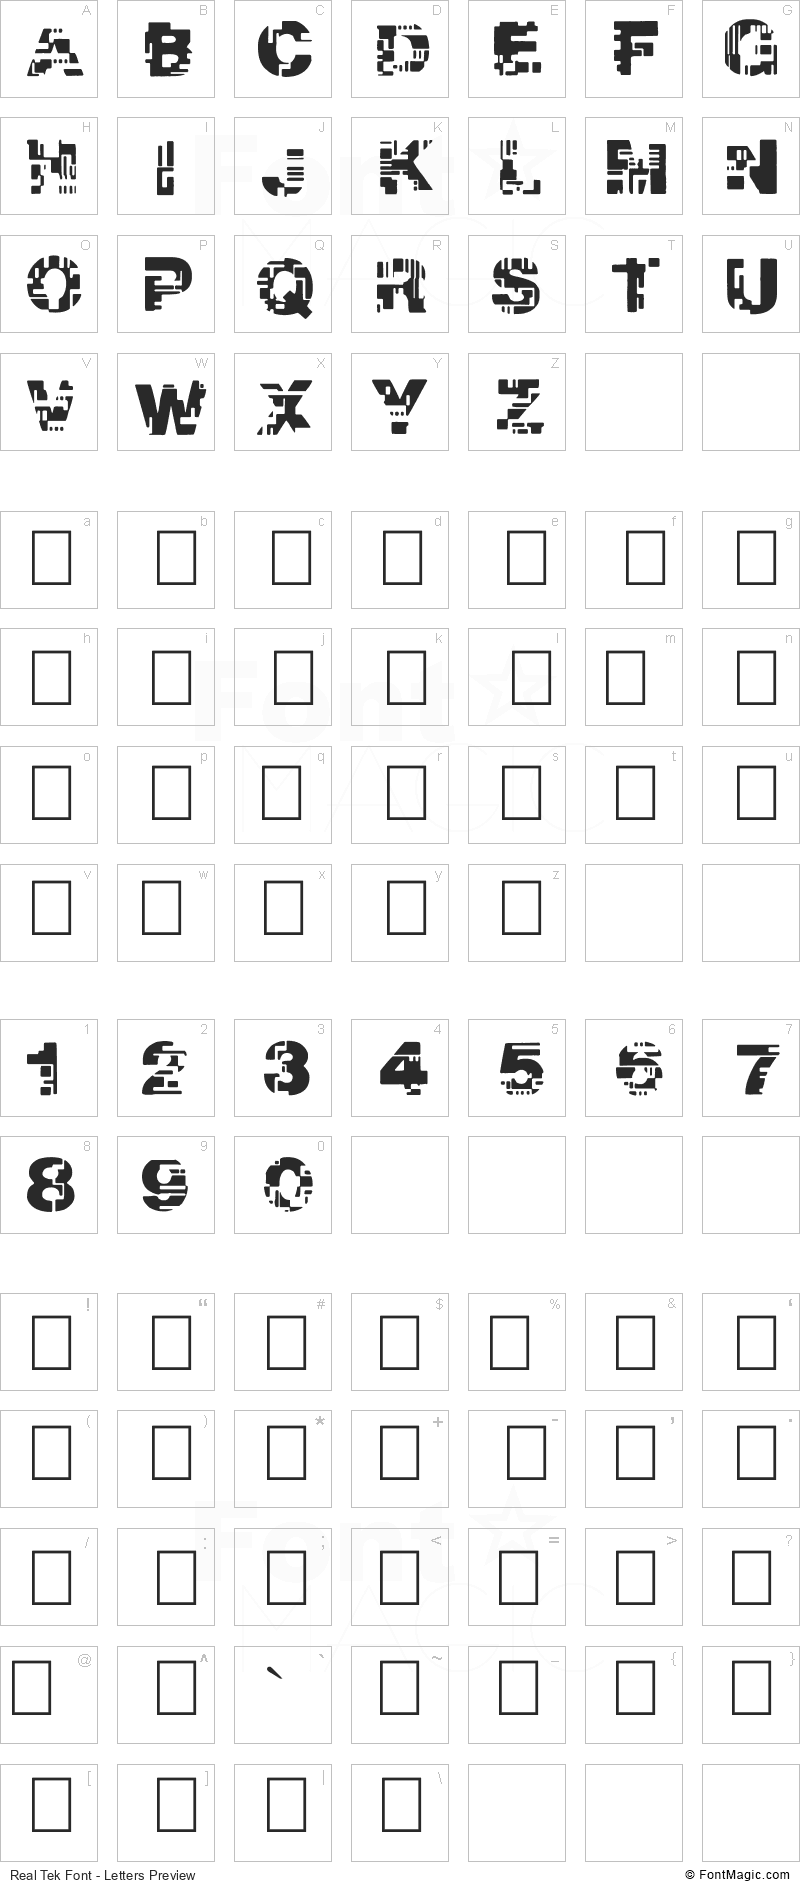 Real Tek Font - All Latters Preview Chart